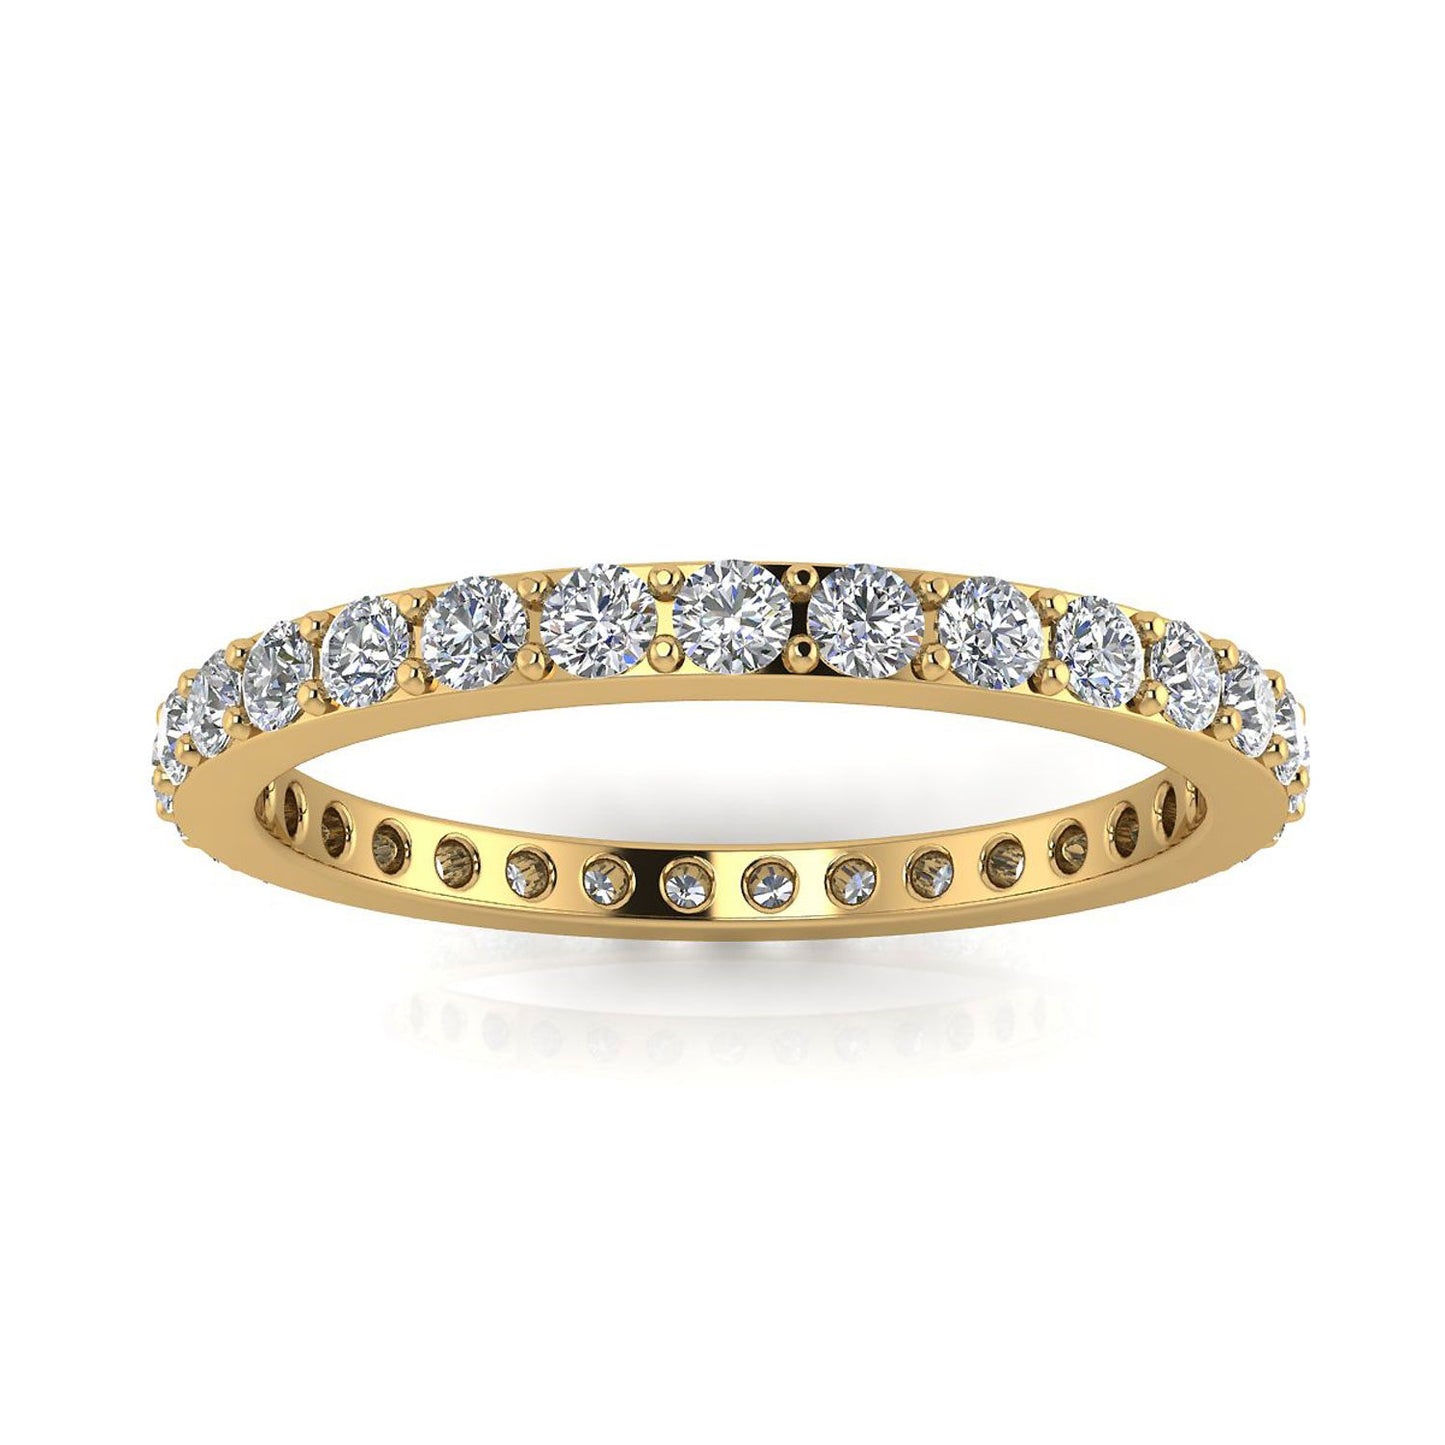 Round Brilliant Cut Diamond Pave Set Eternity Ring In 18k Yellow Gold  (0.74ct. Tw.) Ring Size 8.5